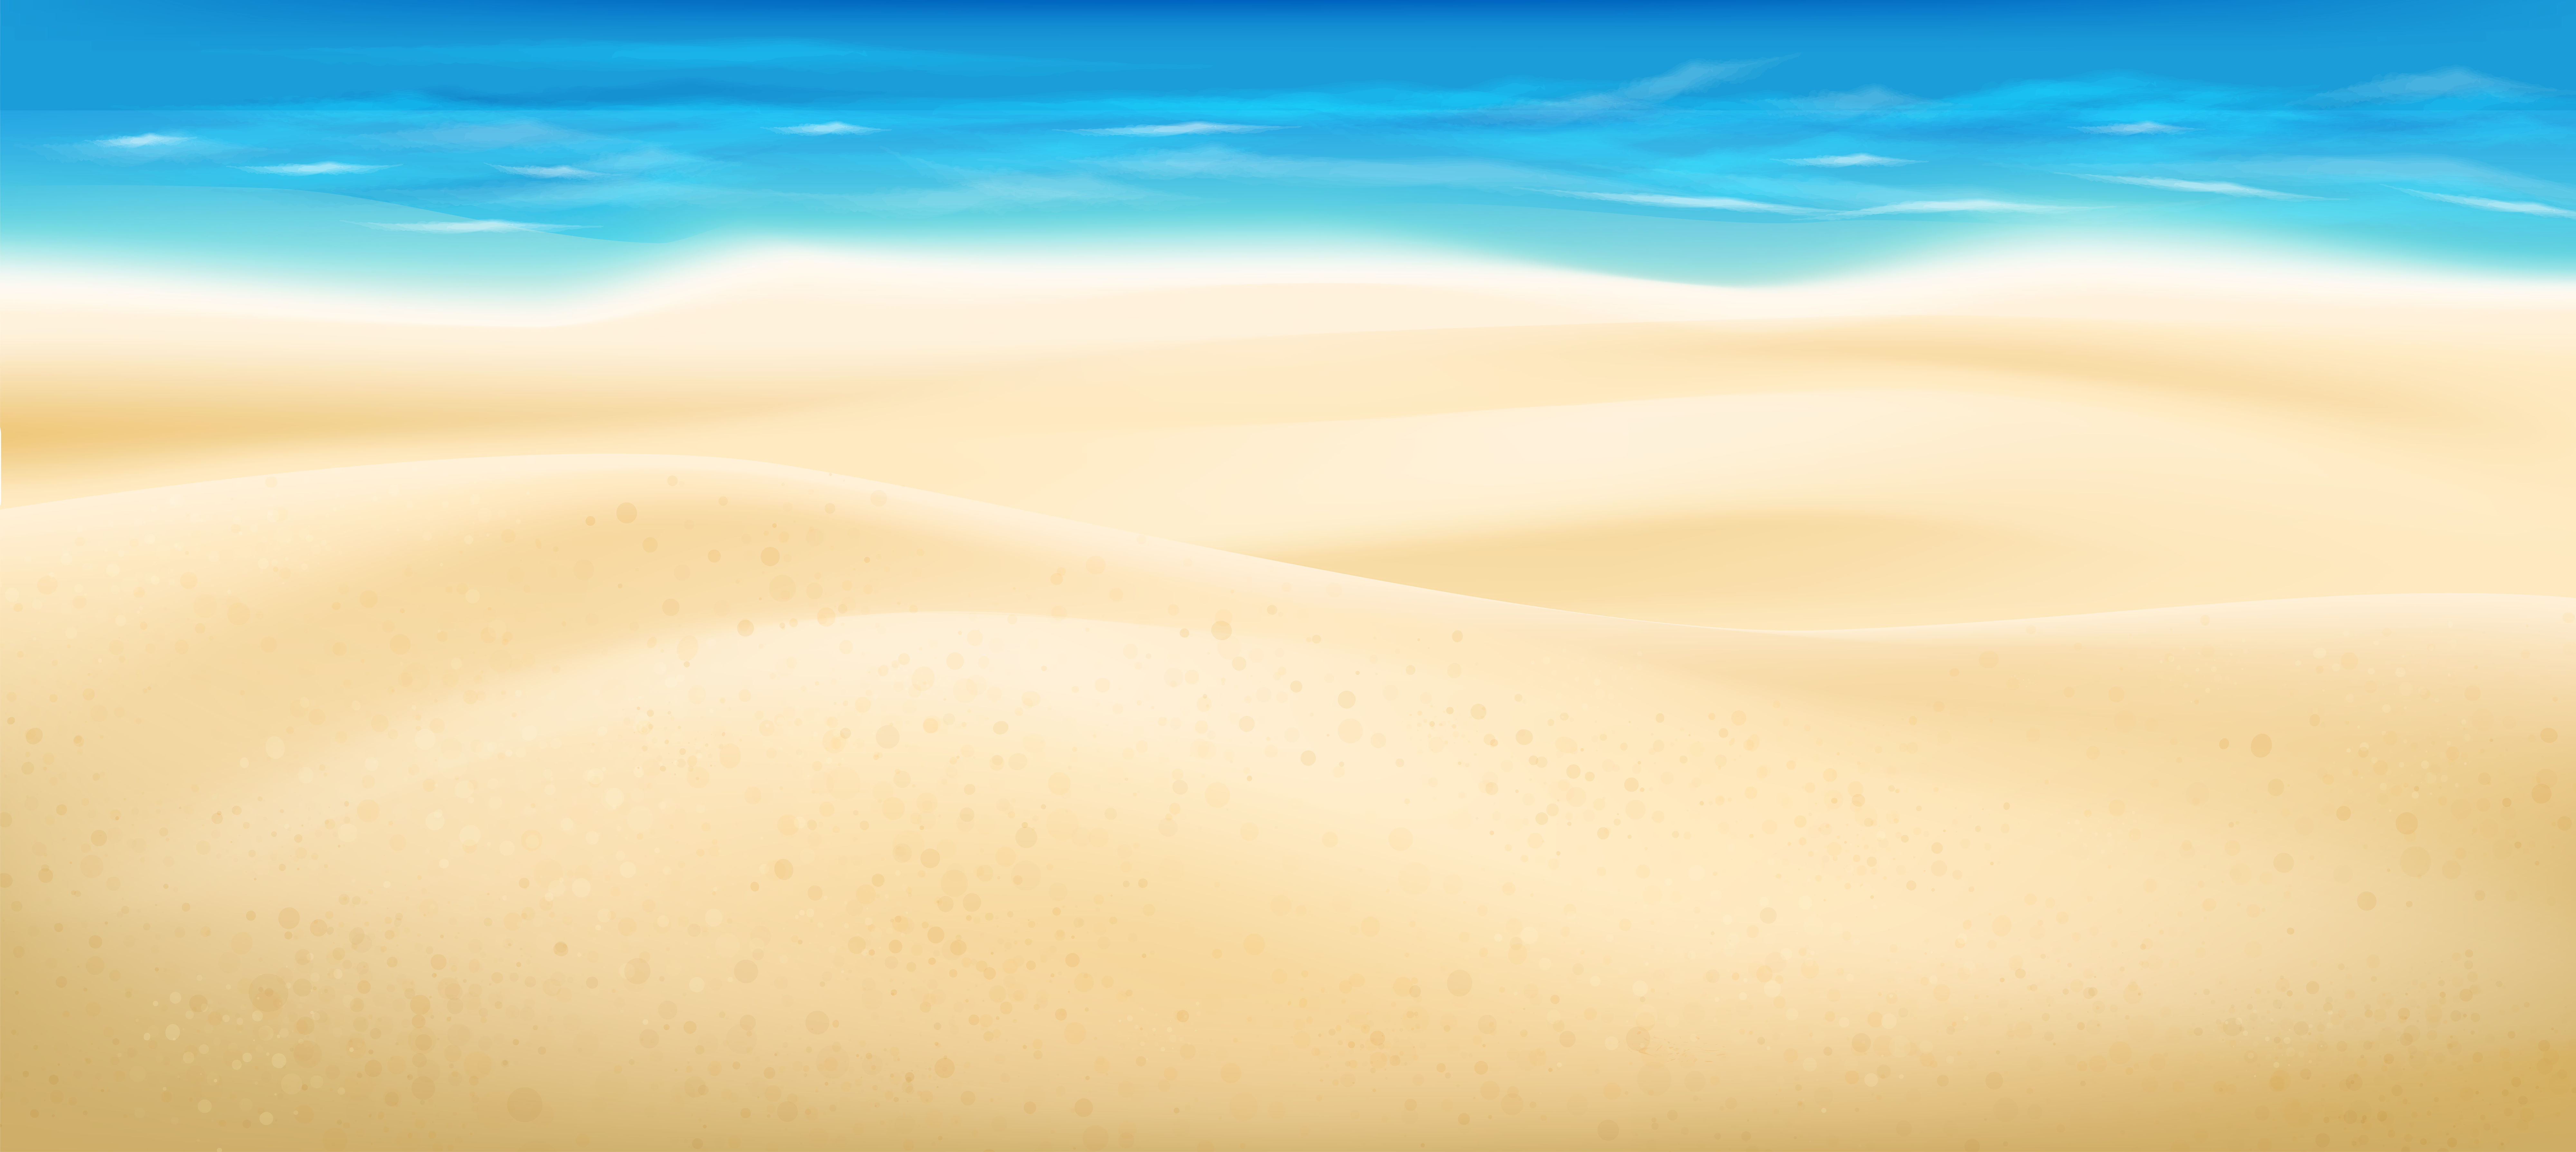 Sea and Sand PNG Clip Art Image.